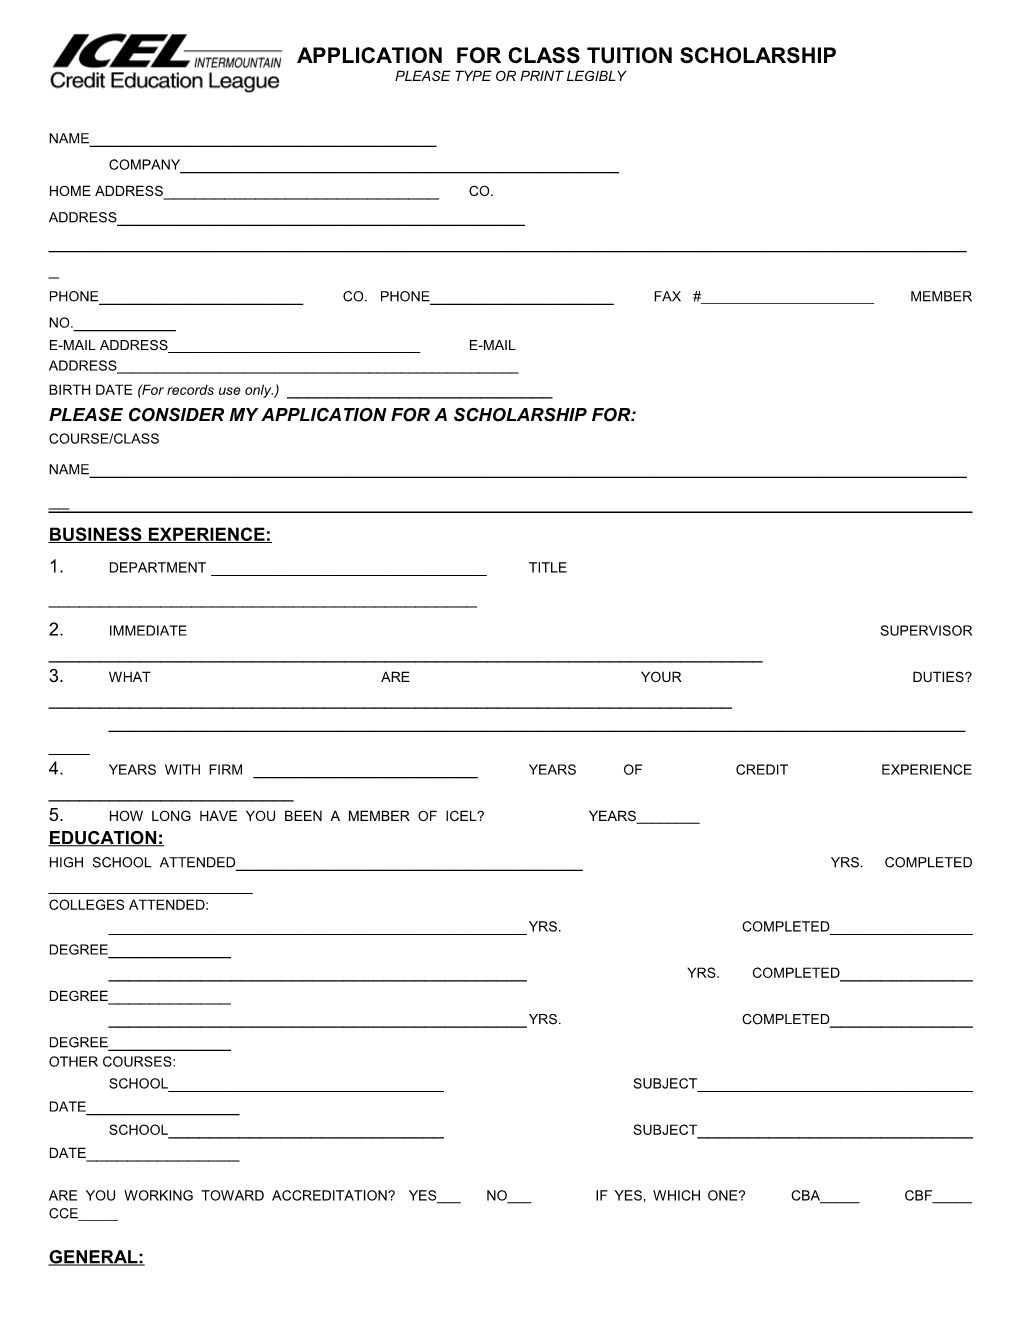 Application for Class Tuition Scholarship